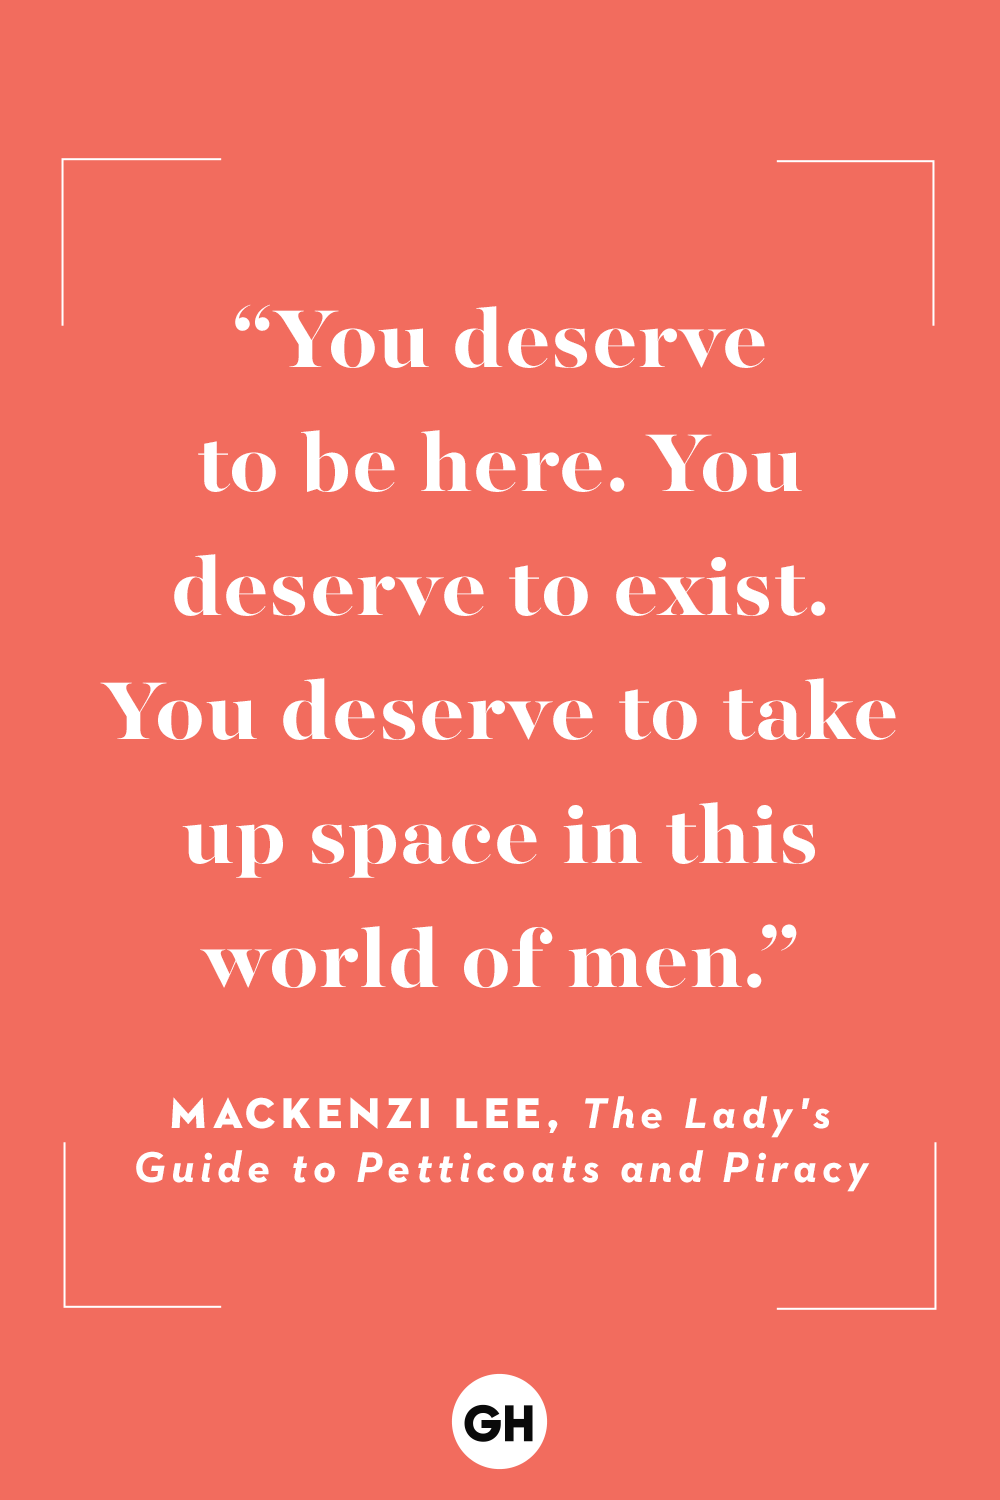 21 Best Inspirational Feminist Quotes Of All Time